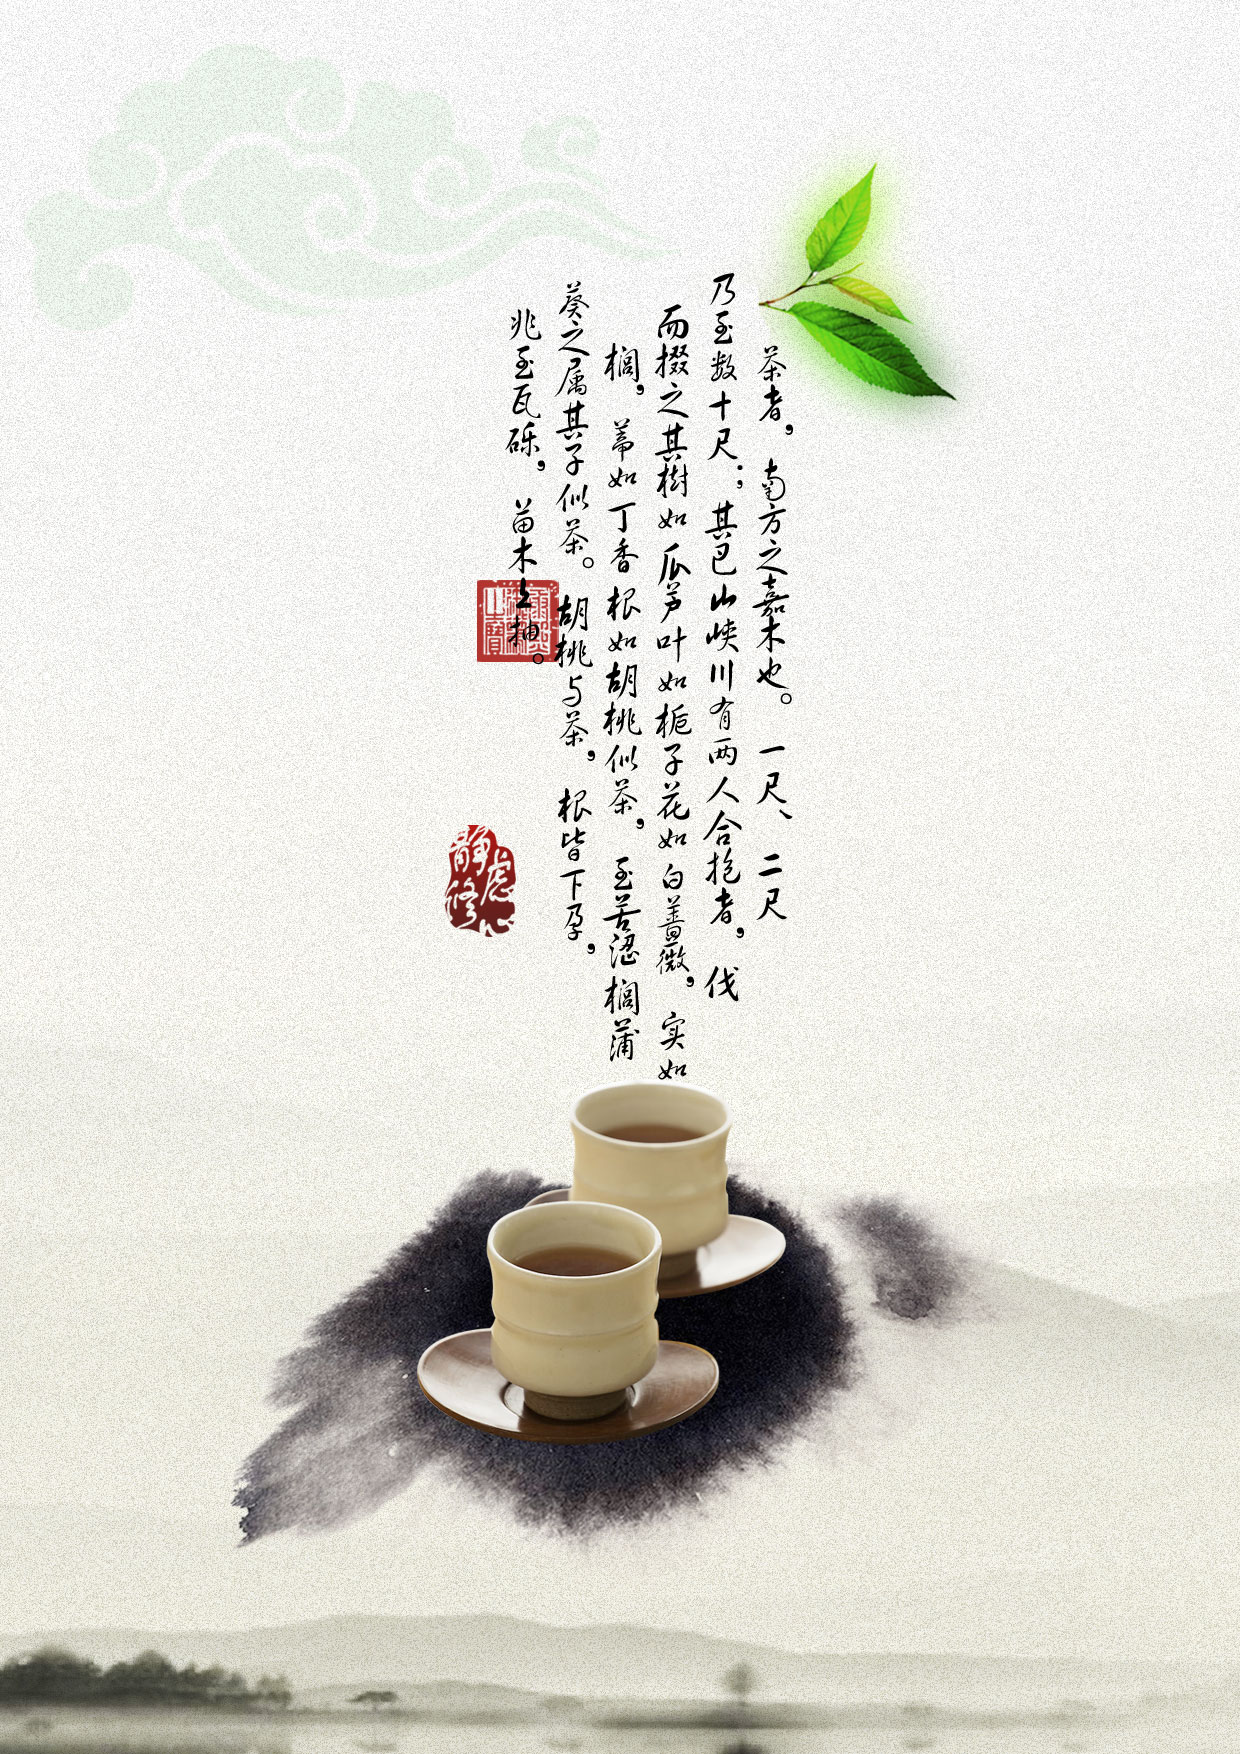 Chinese tea theme poster design - PSD File Free Download